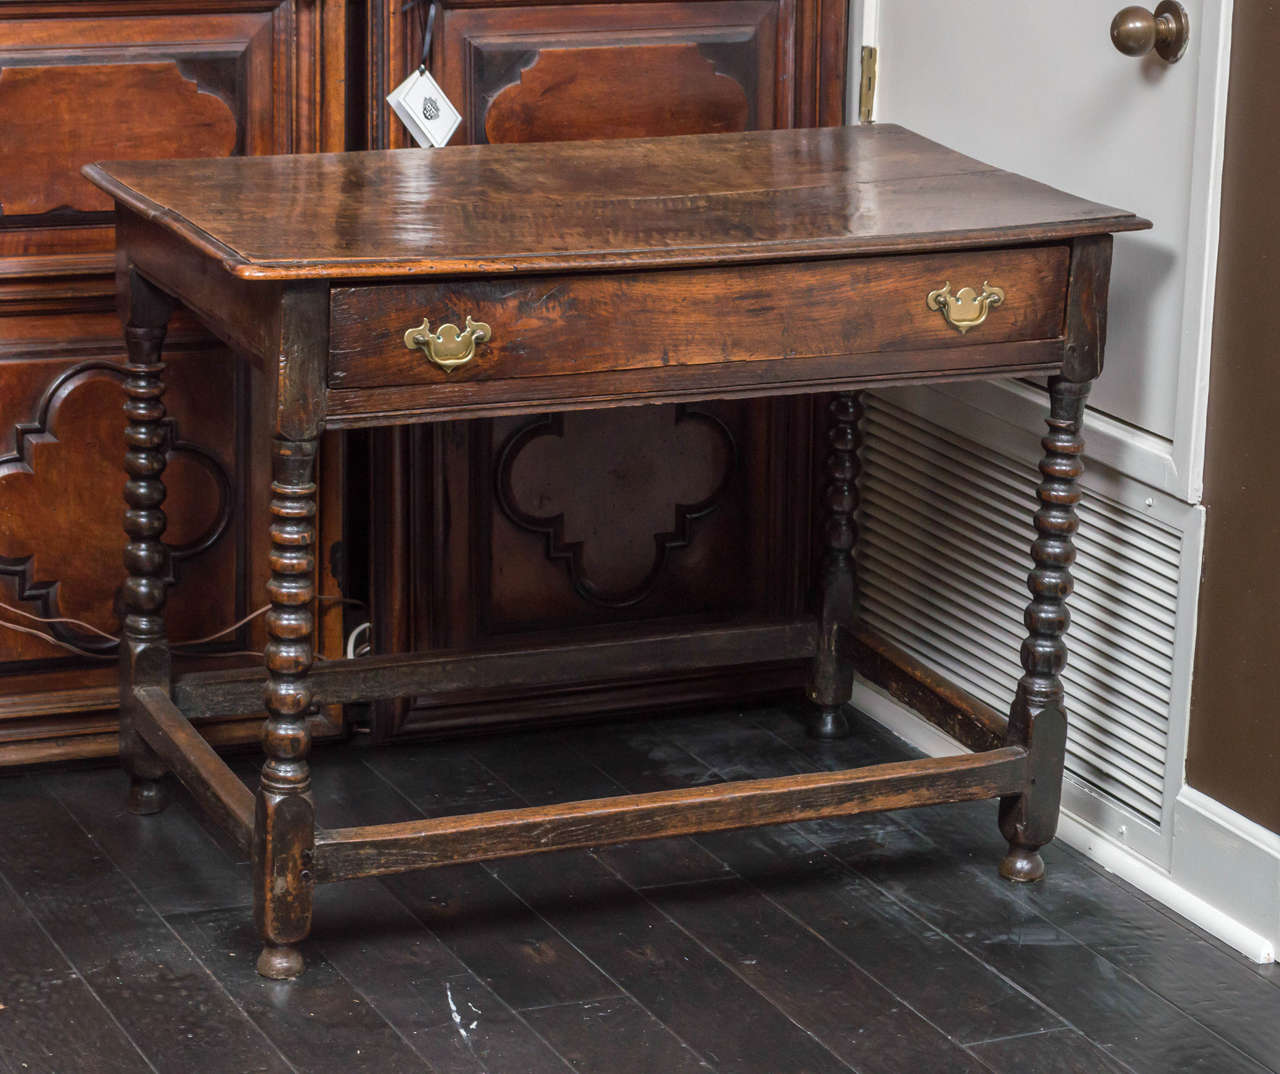 English oak side table with single drawer and bobbin turned legs, circa 1780